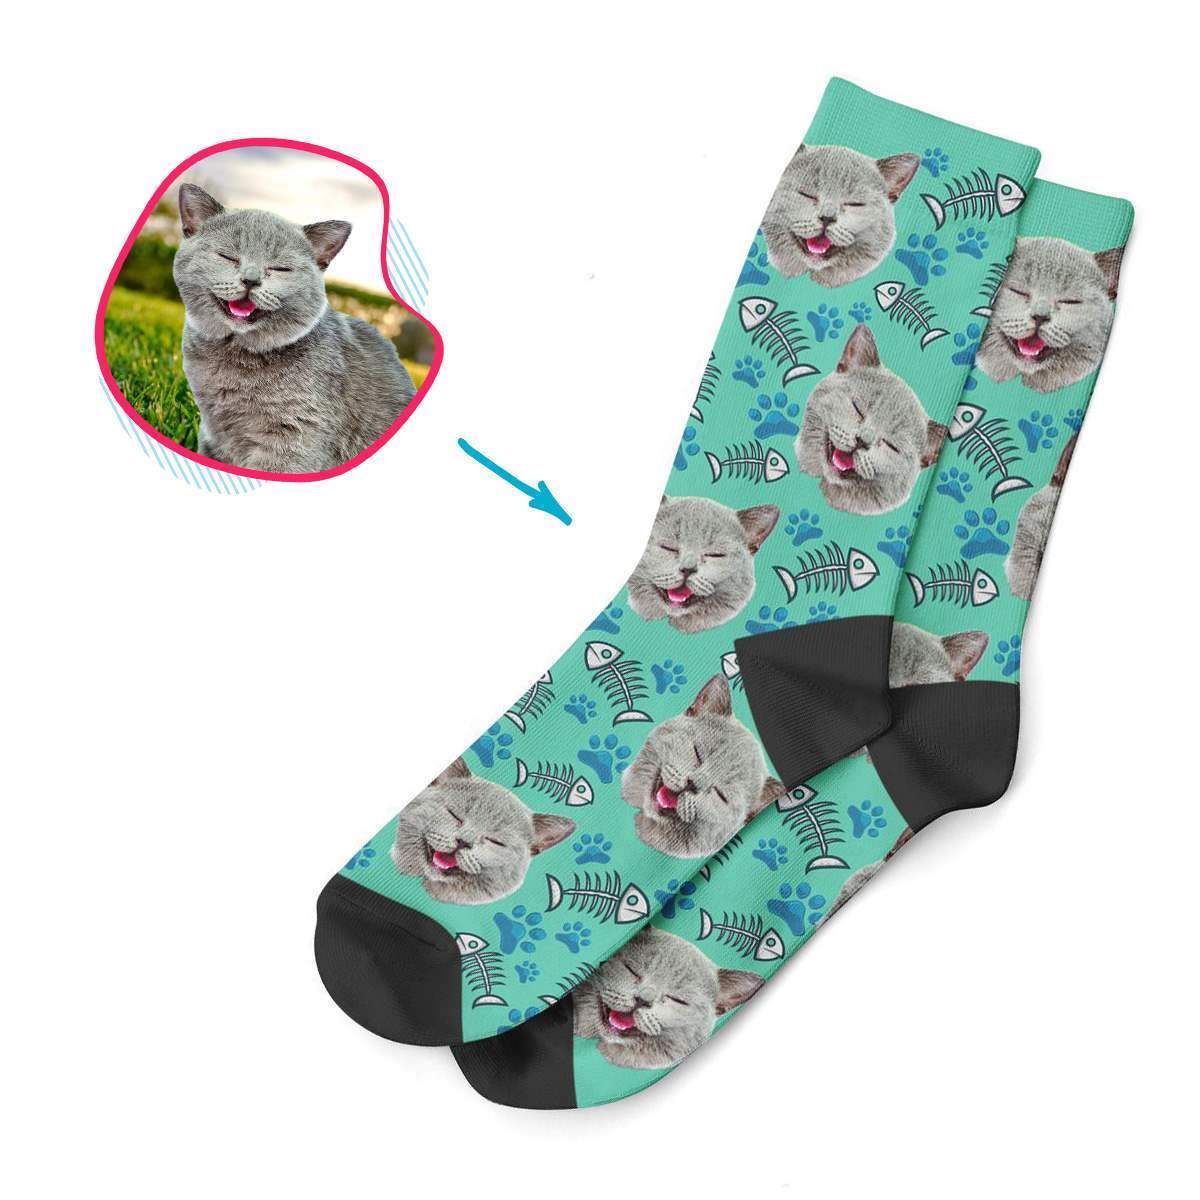 mint Cat socks personalized with photo of face printed on them